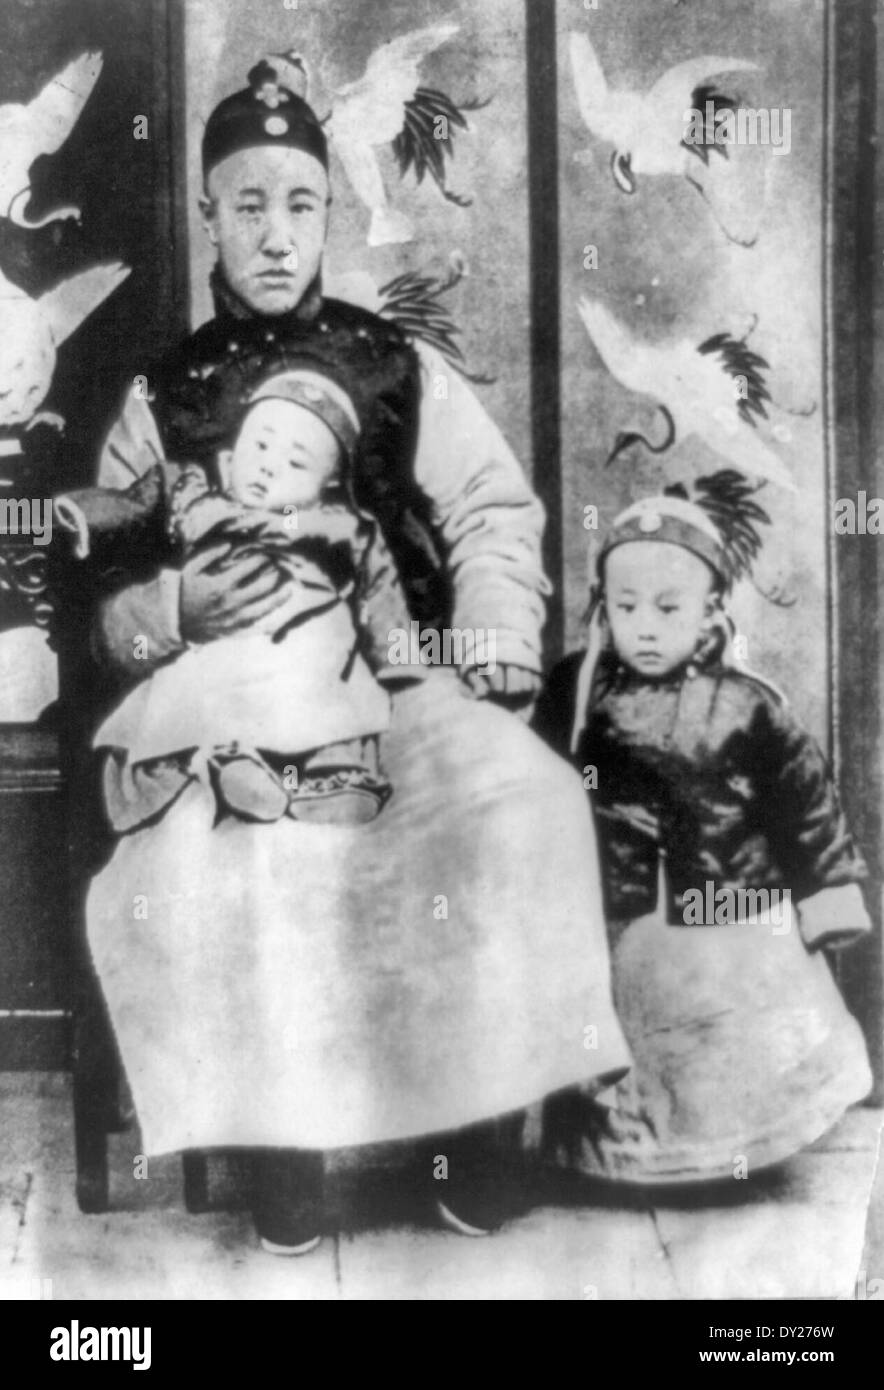 Three year old Emperor of China,  Pu Yi, throne name Hsuantung, on the right. On the left is his father, Prince Chun, the Regent, holding a younger brother. 1909 Stock Photo